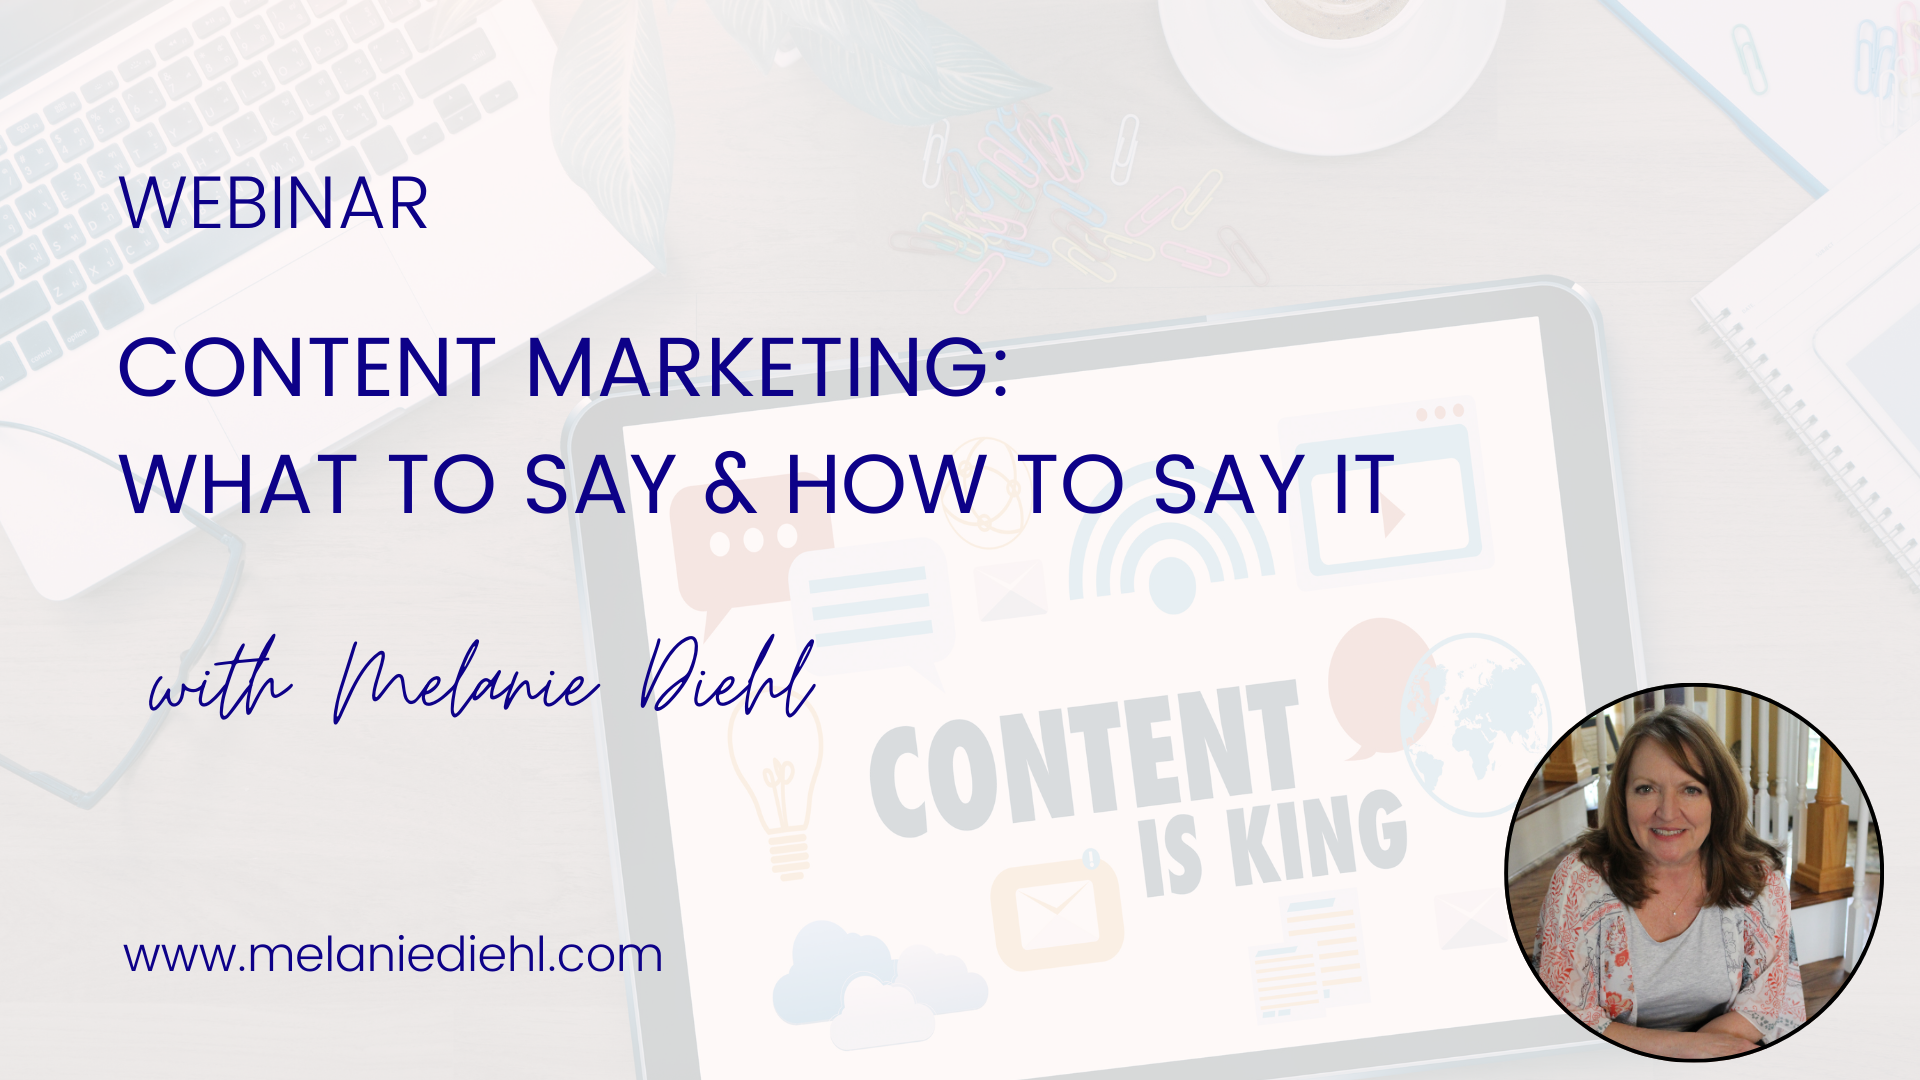 Content Marketing: What to Say & How to Say It